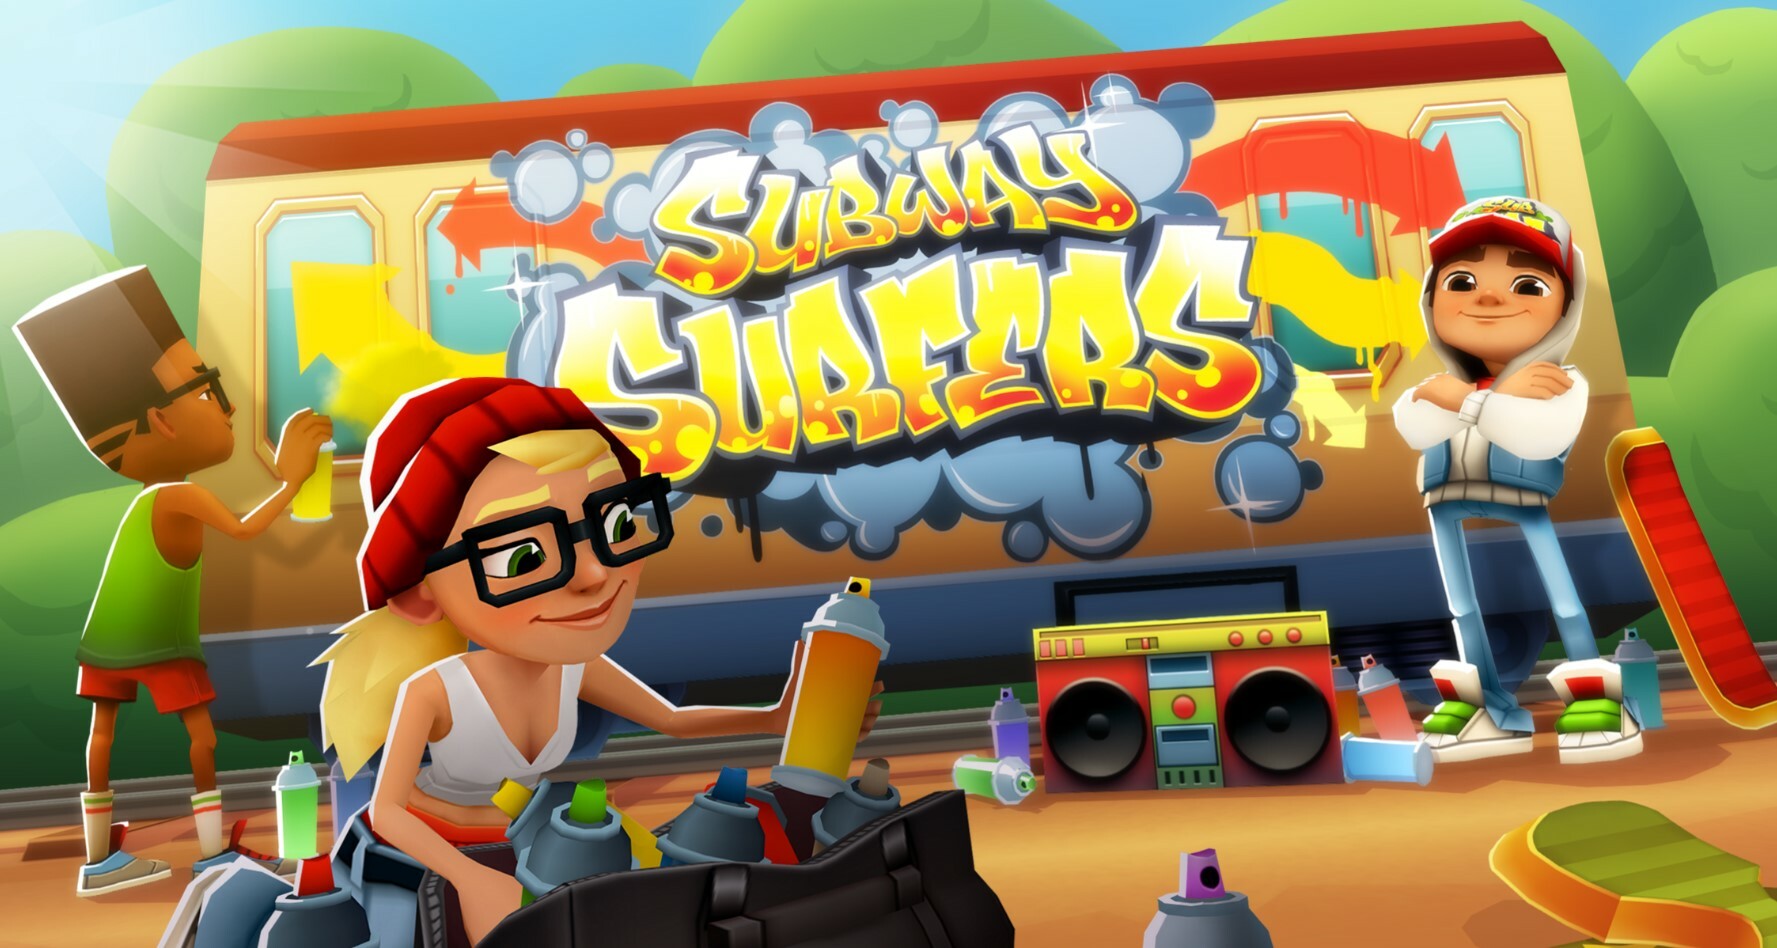 Category:Items, Subway Surfers Wiki